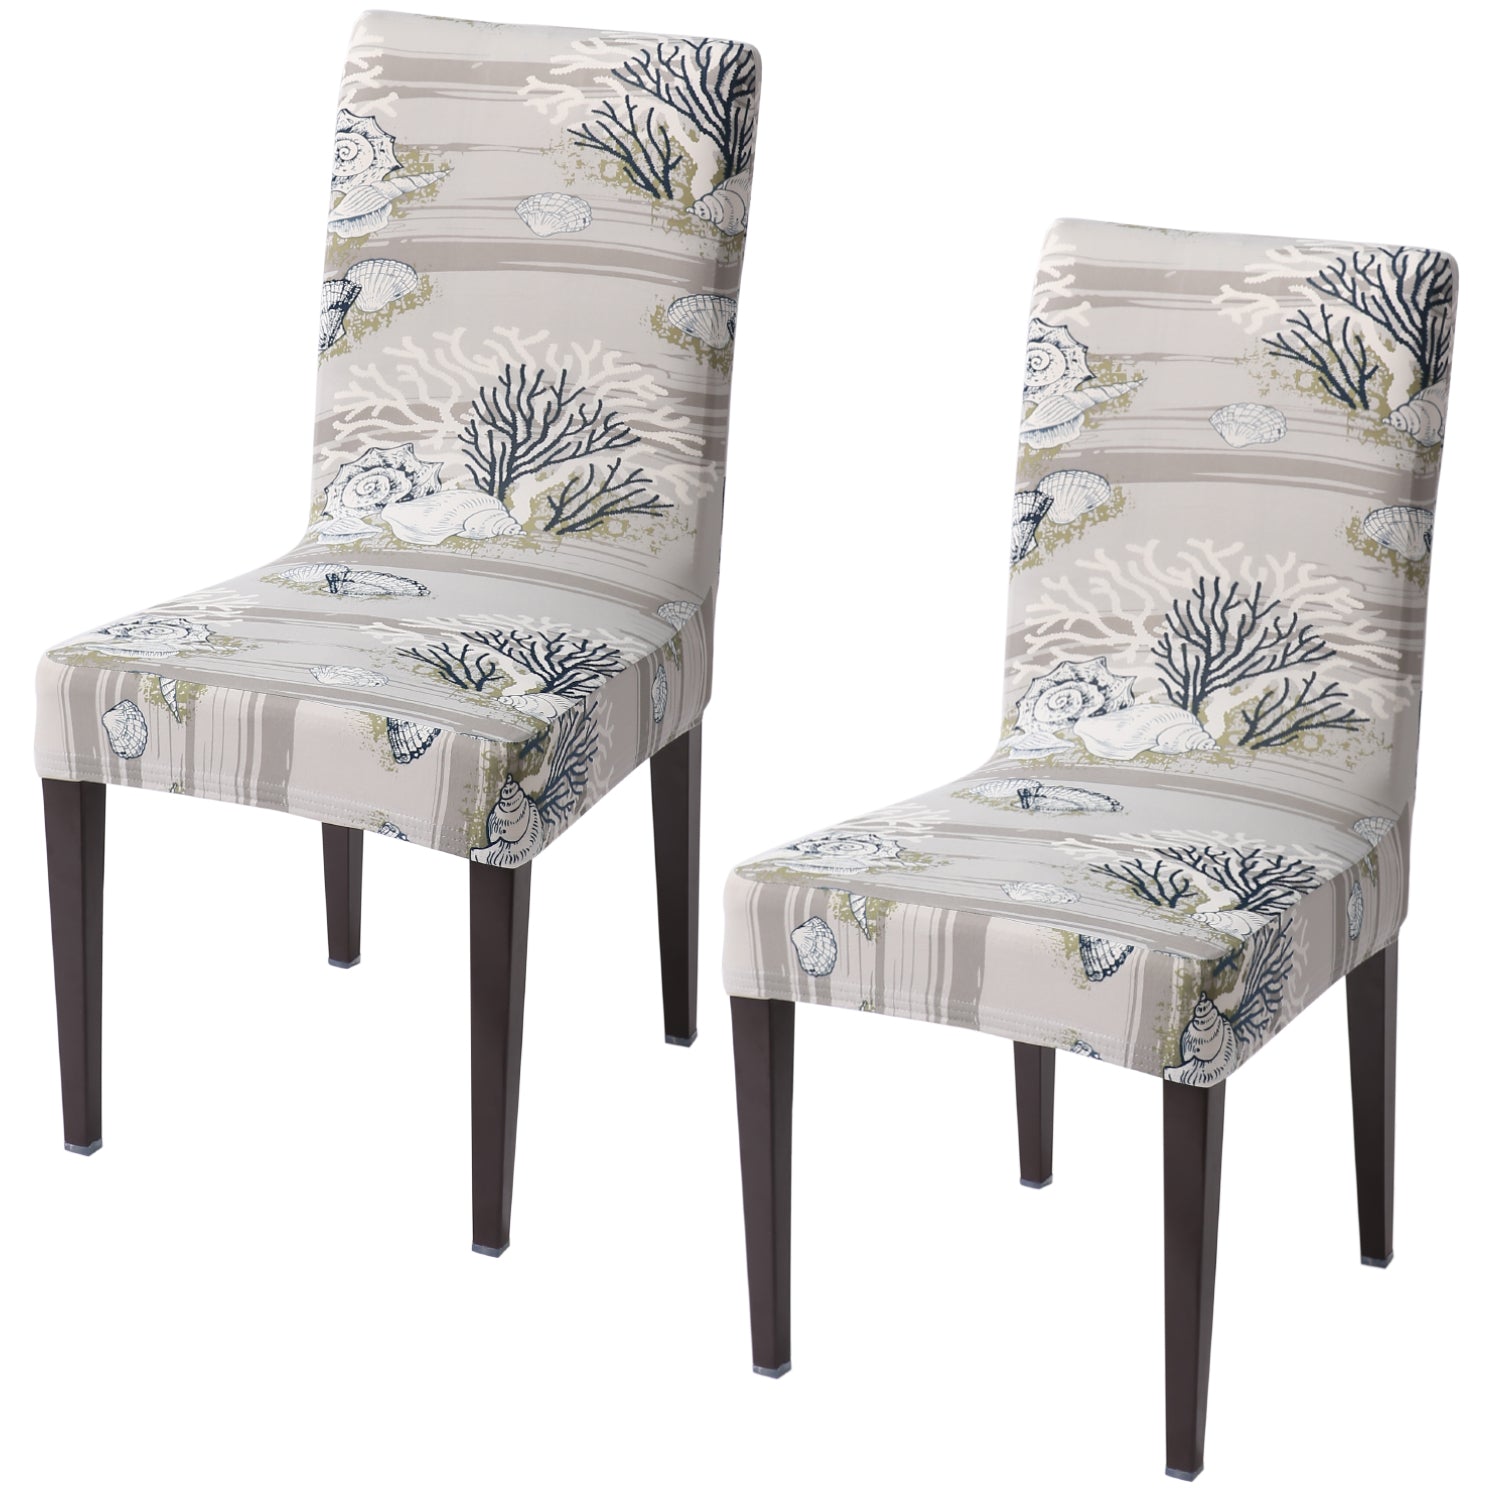 Elastic Stretchable Dining Chair Cover, Grey Sea Shells